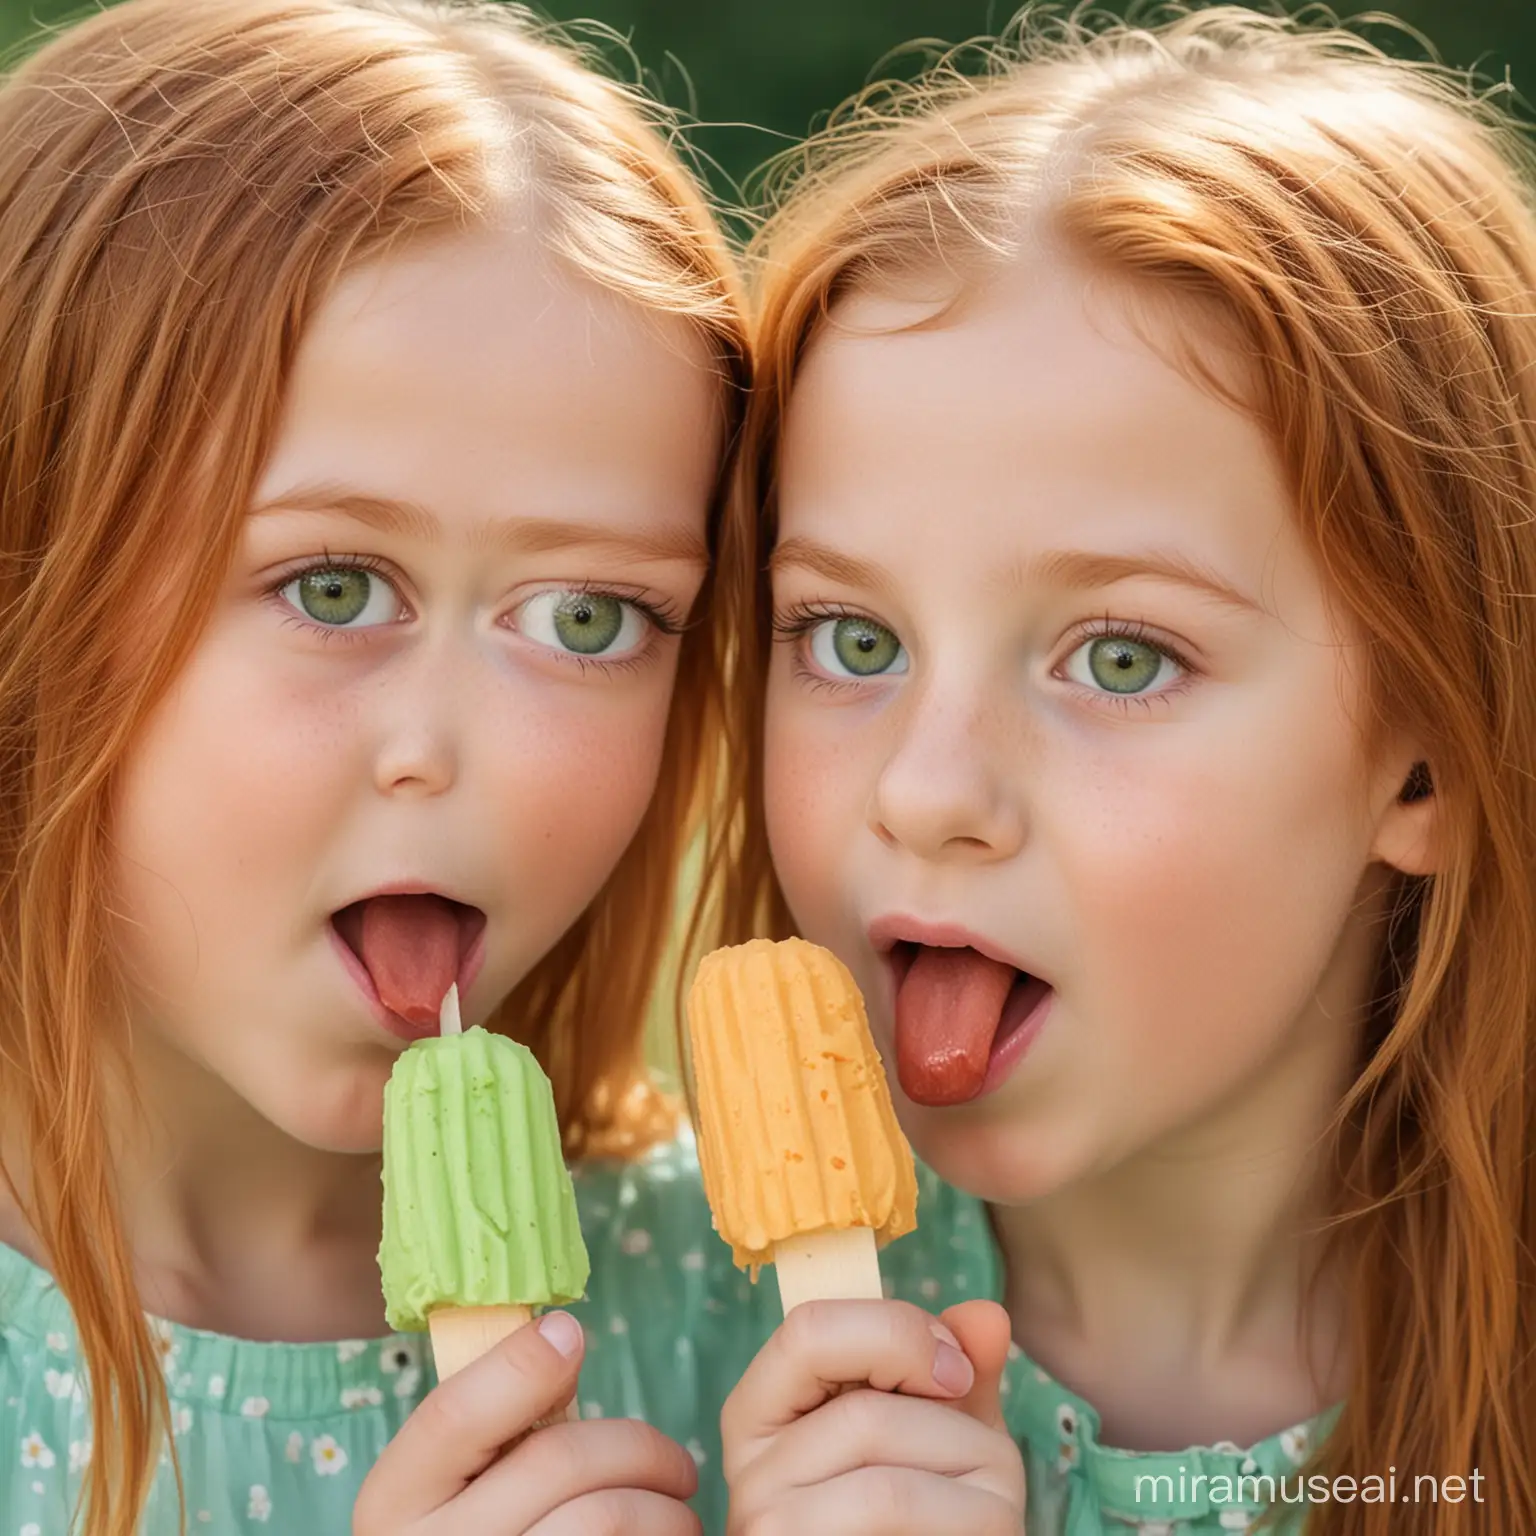 Two Cute Girls Sharing Ice Lolly in Summer Fun